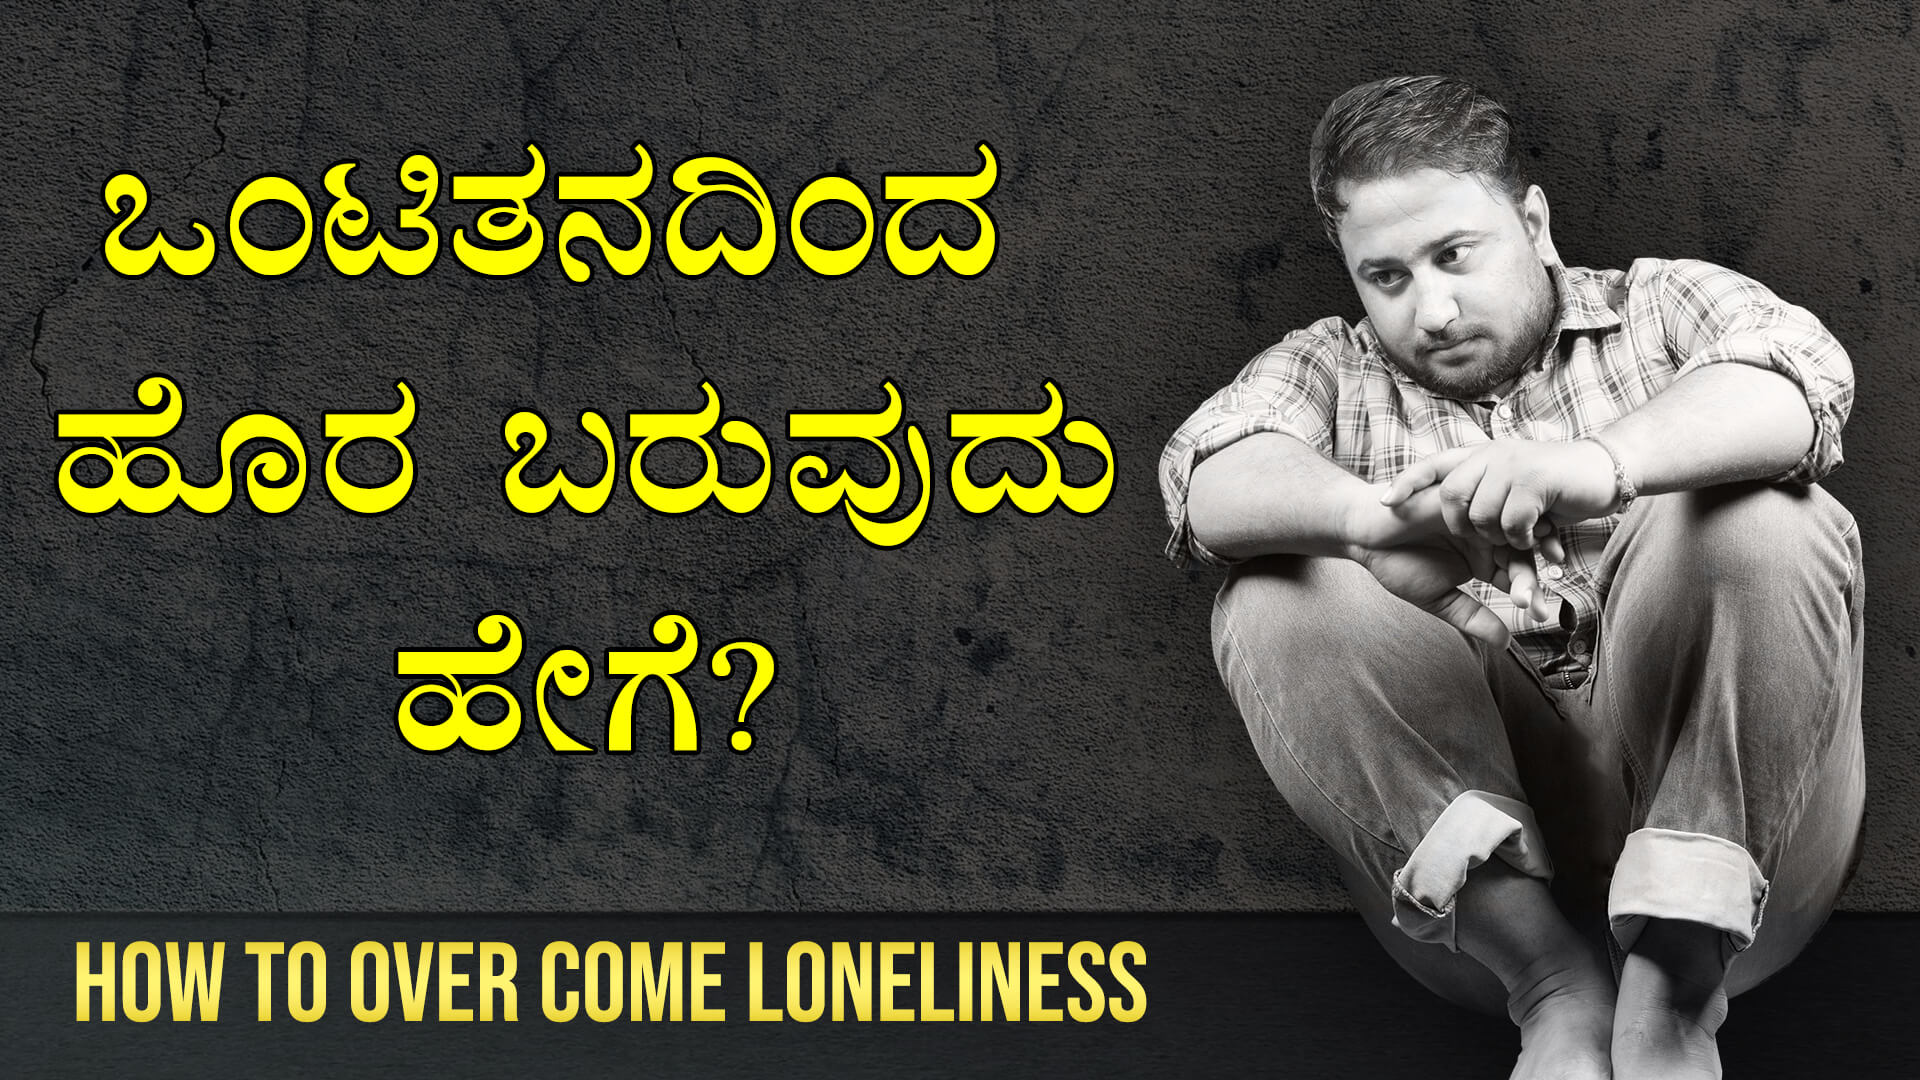 You are currently viewing ಒಂಟಿತನದಿಂದ ಹೊರ ಬರುವುದು ಹೇಗೆ? – How to Over come Loneliness in Kannada